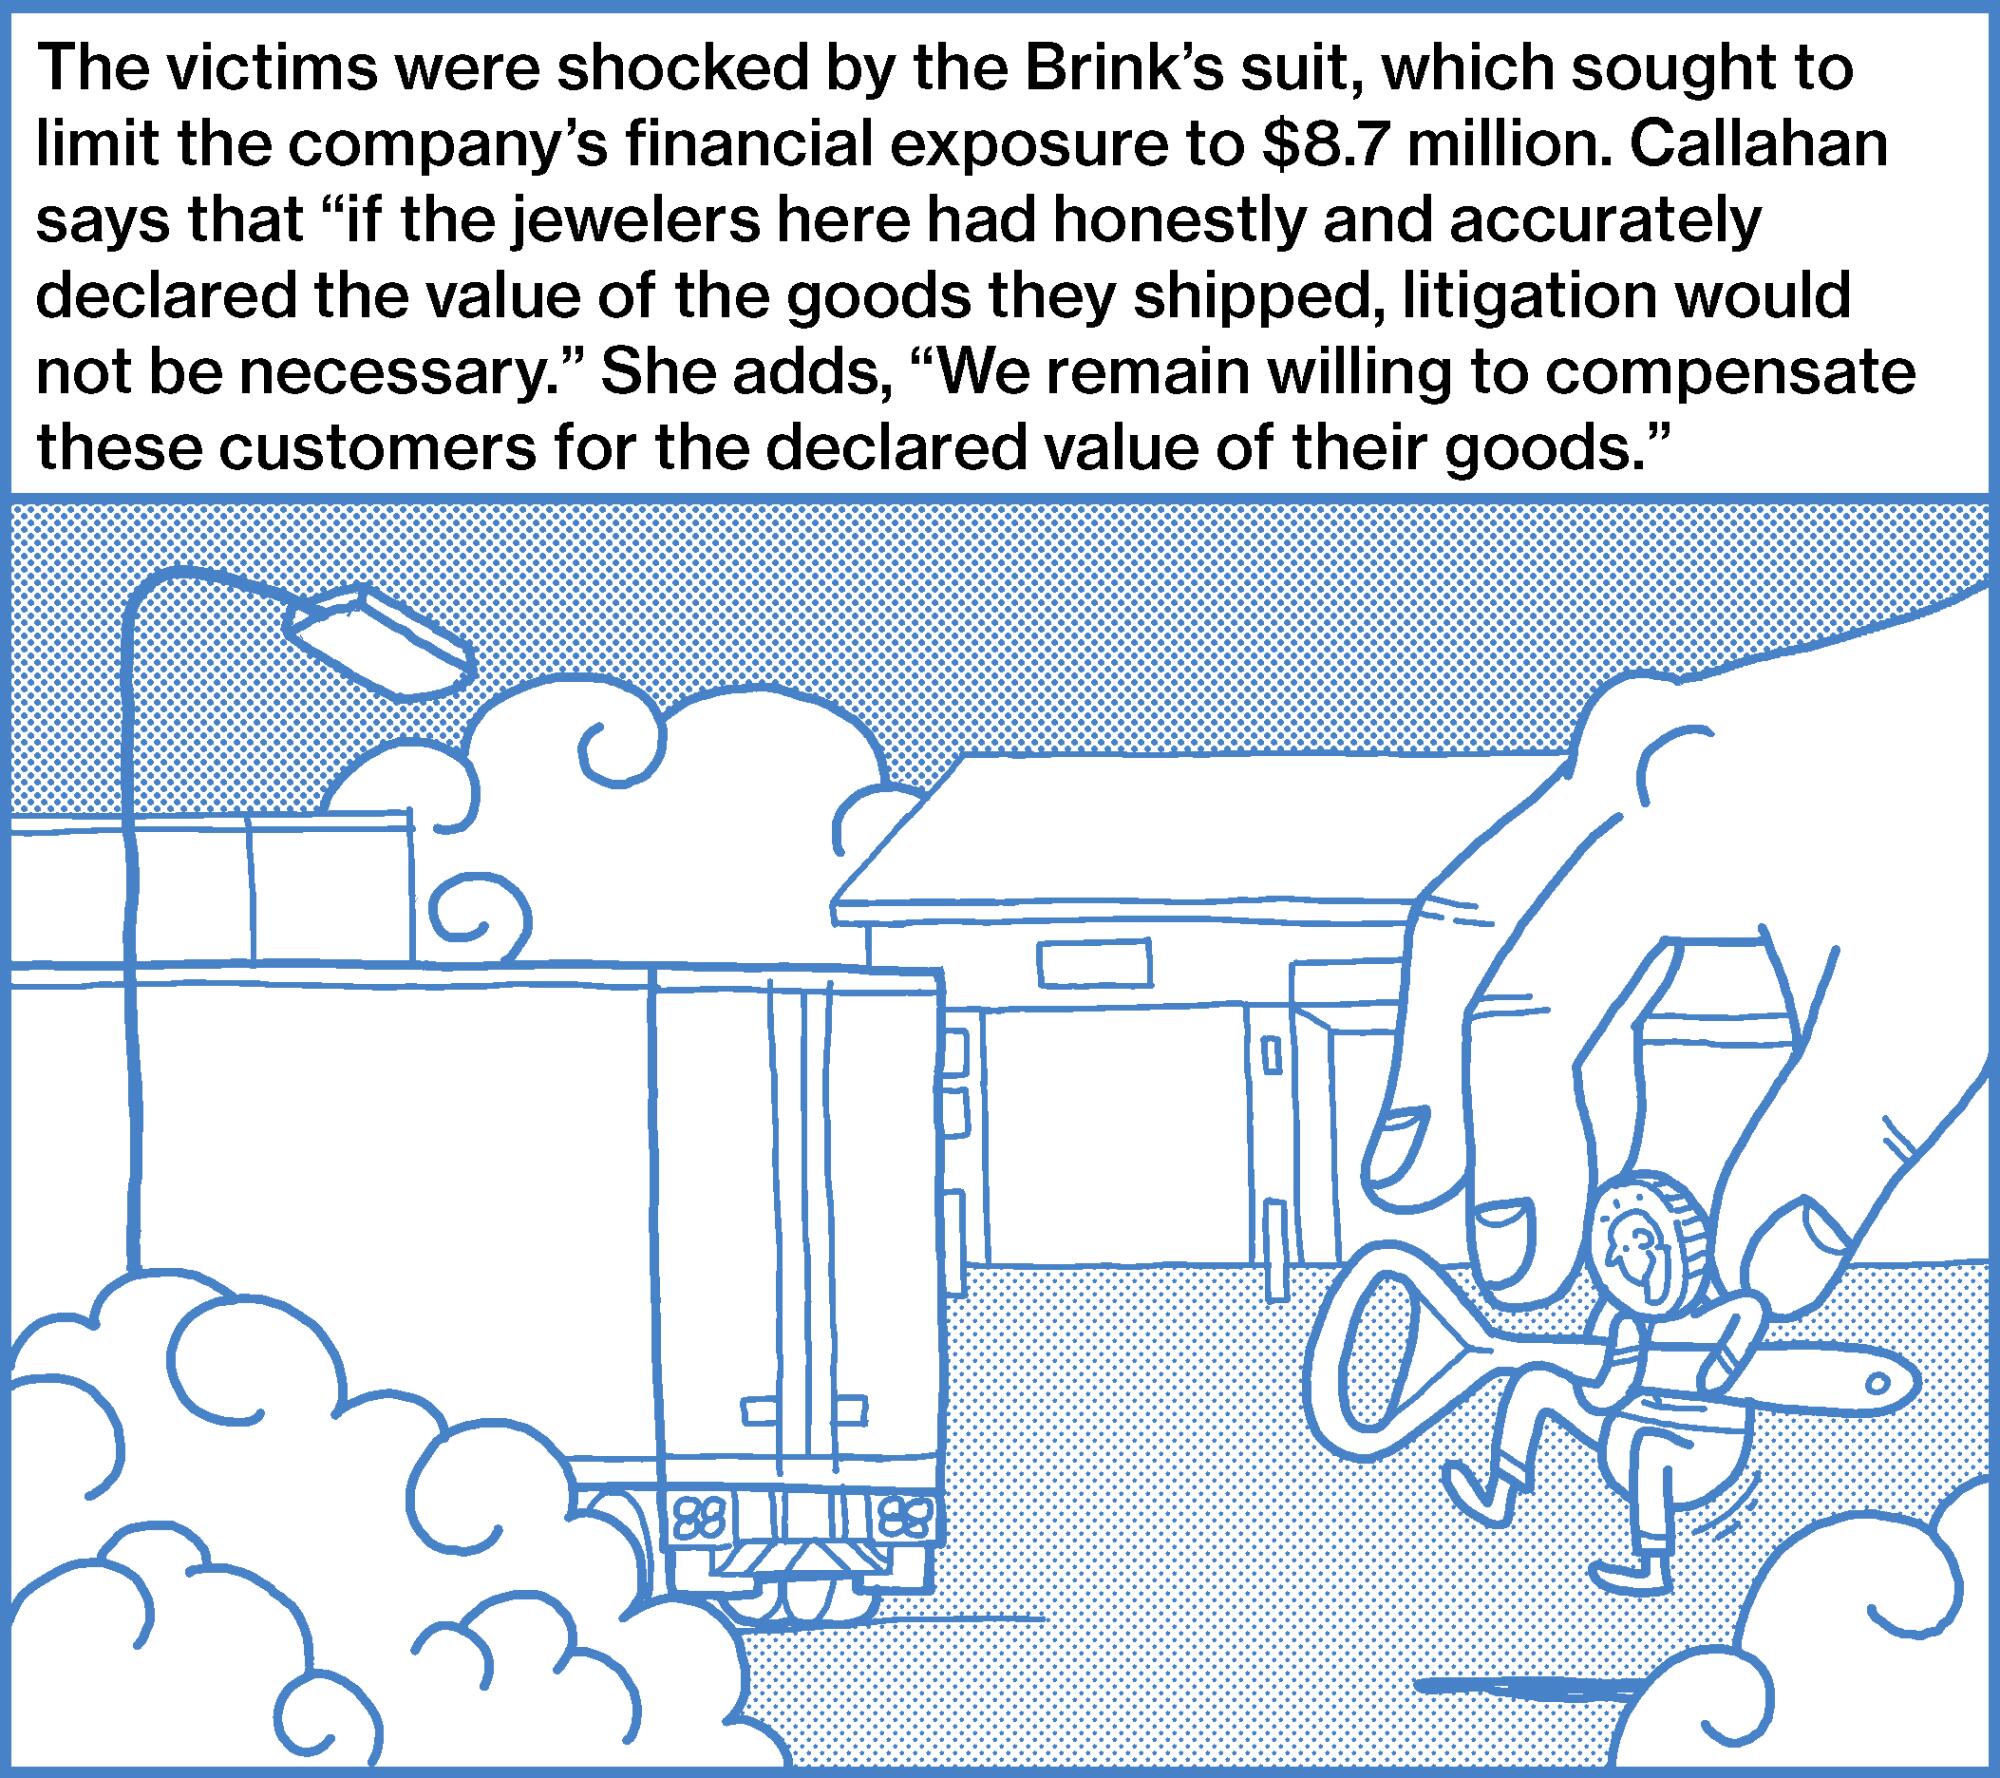 The victims were shocked by the Brink’s suit, which sought to limit the company’s financial exposure to $8.7 million.